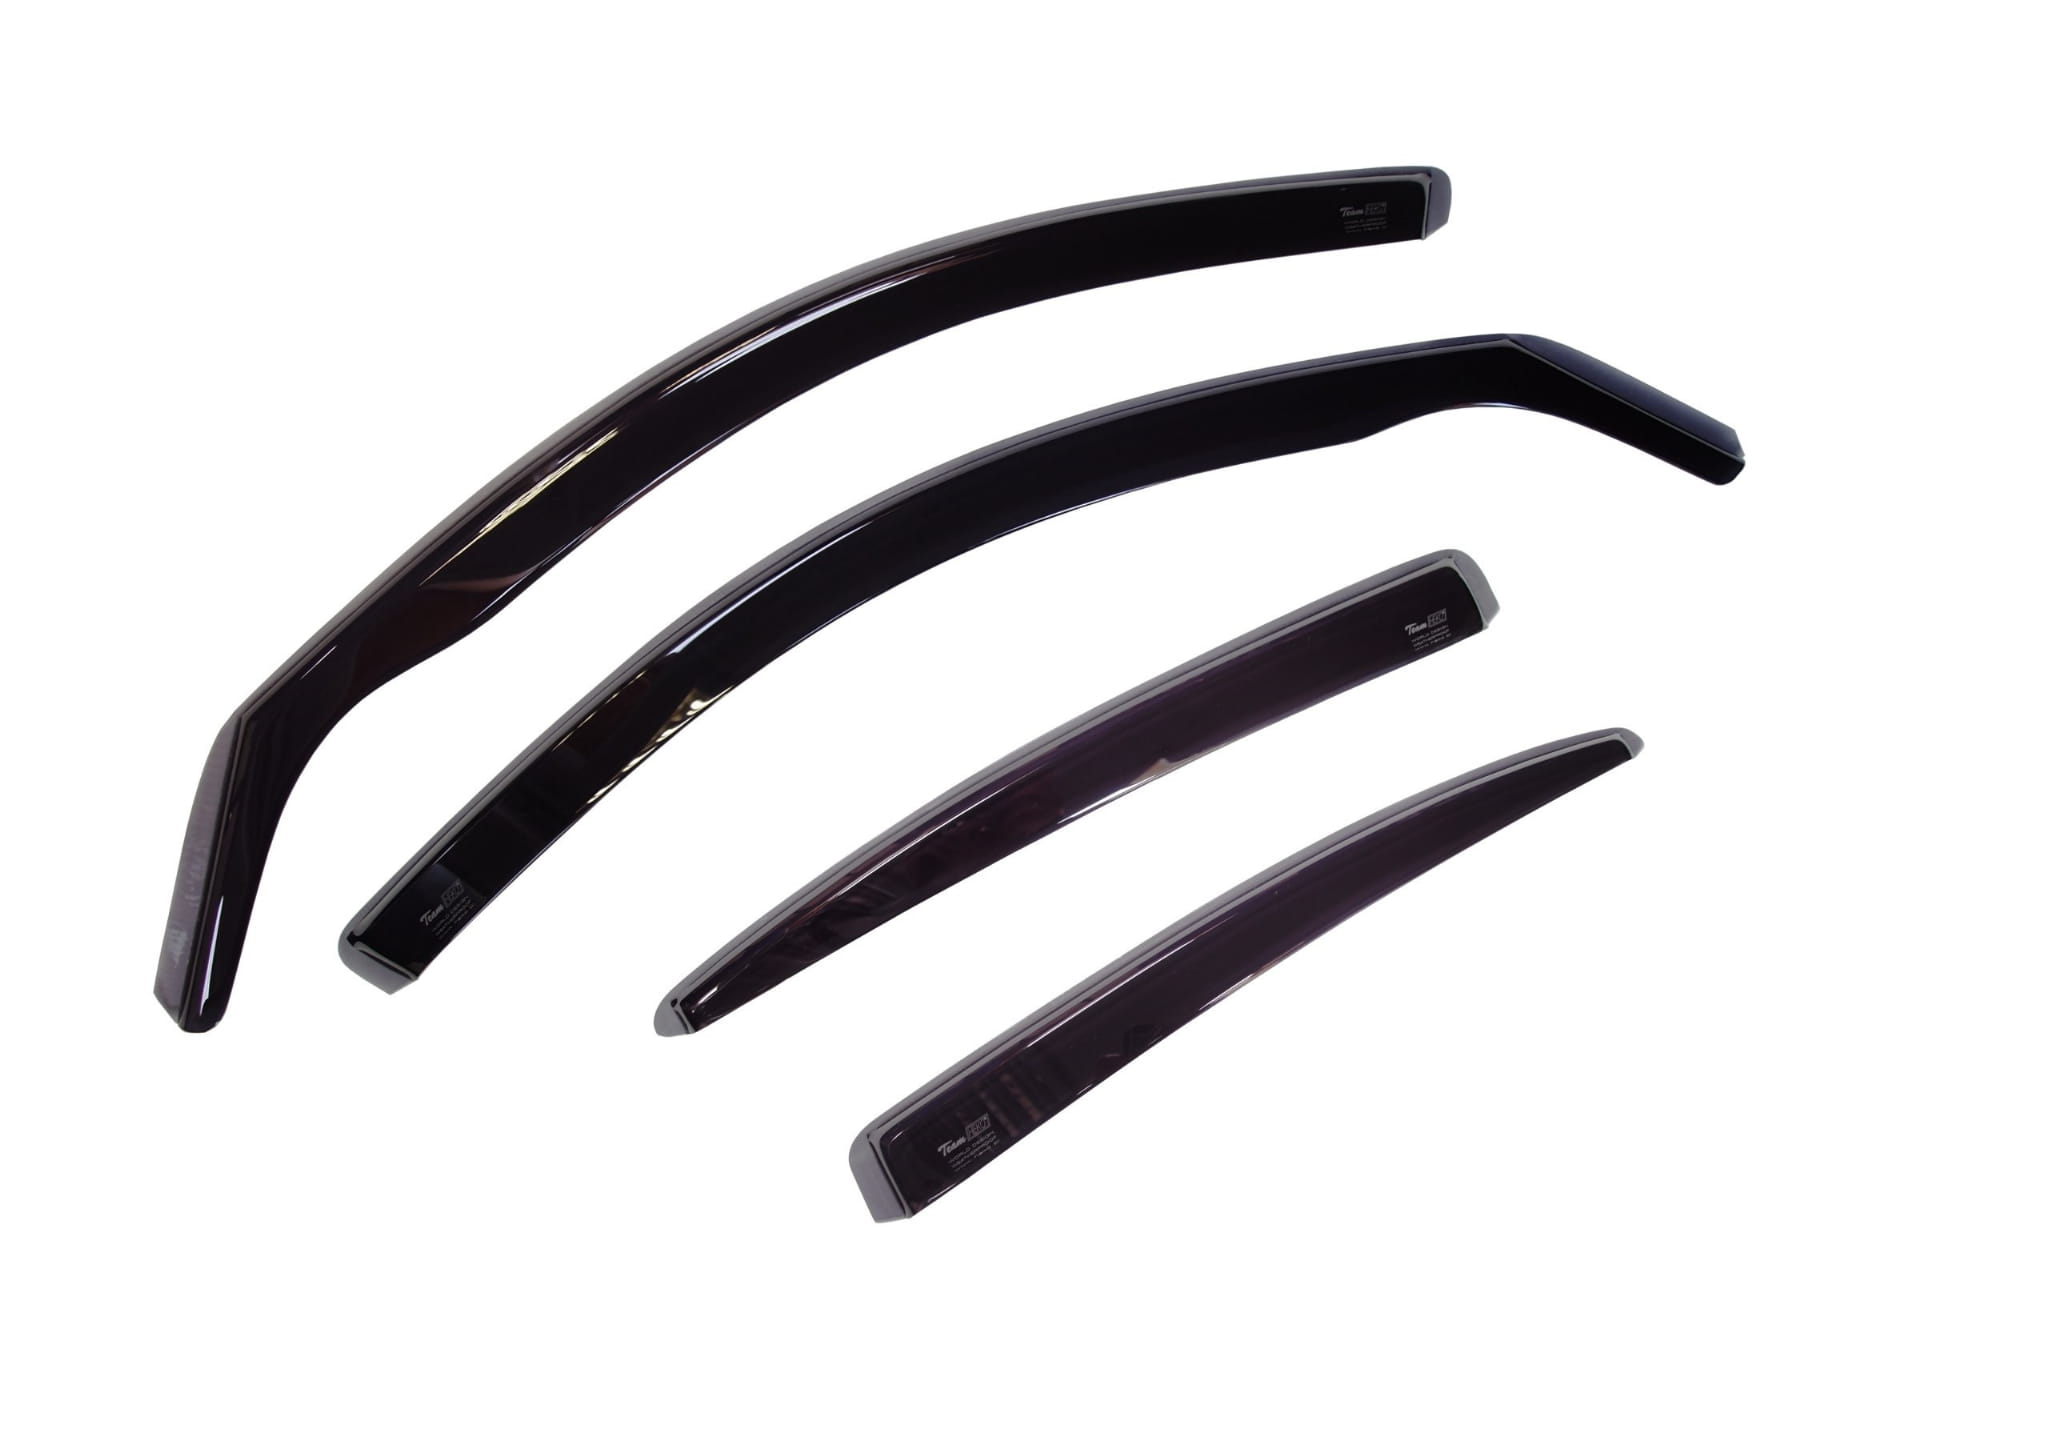 BMW 5 SERIES E60 4DR 2003-2010 TEAM HEKO Wind Deflectors 4PC Set, Wind deflectors help maximize air flow through the vehicle when driving without letting rain in.